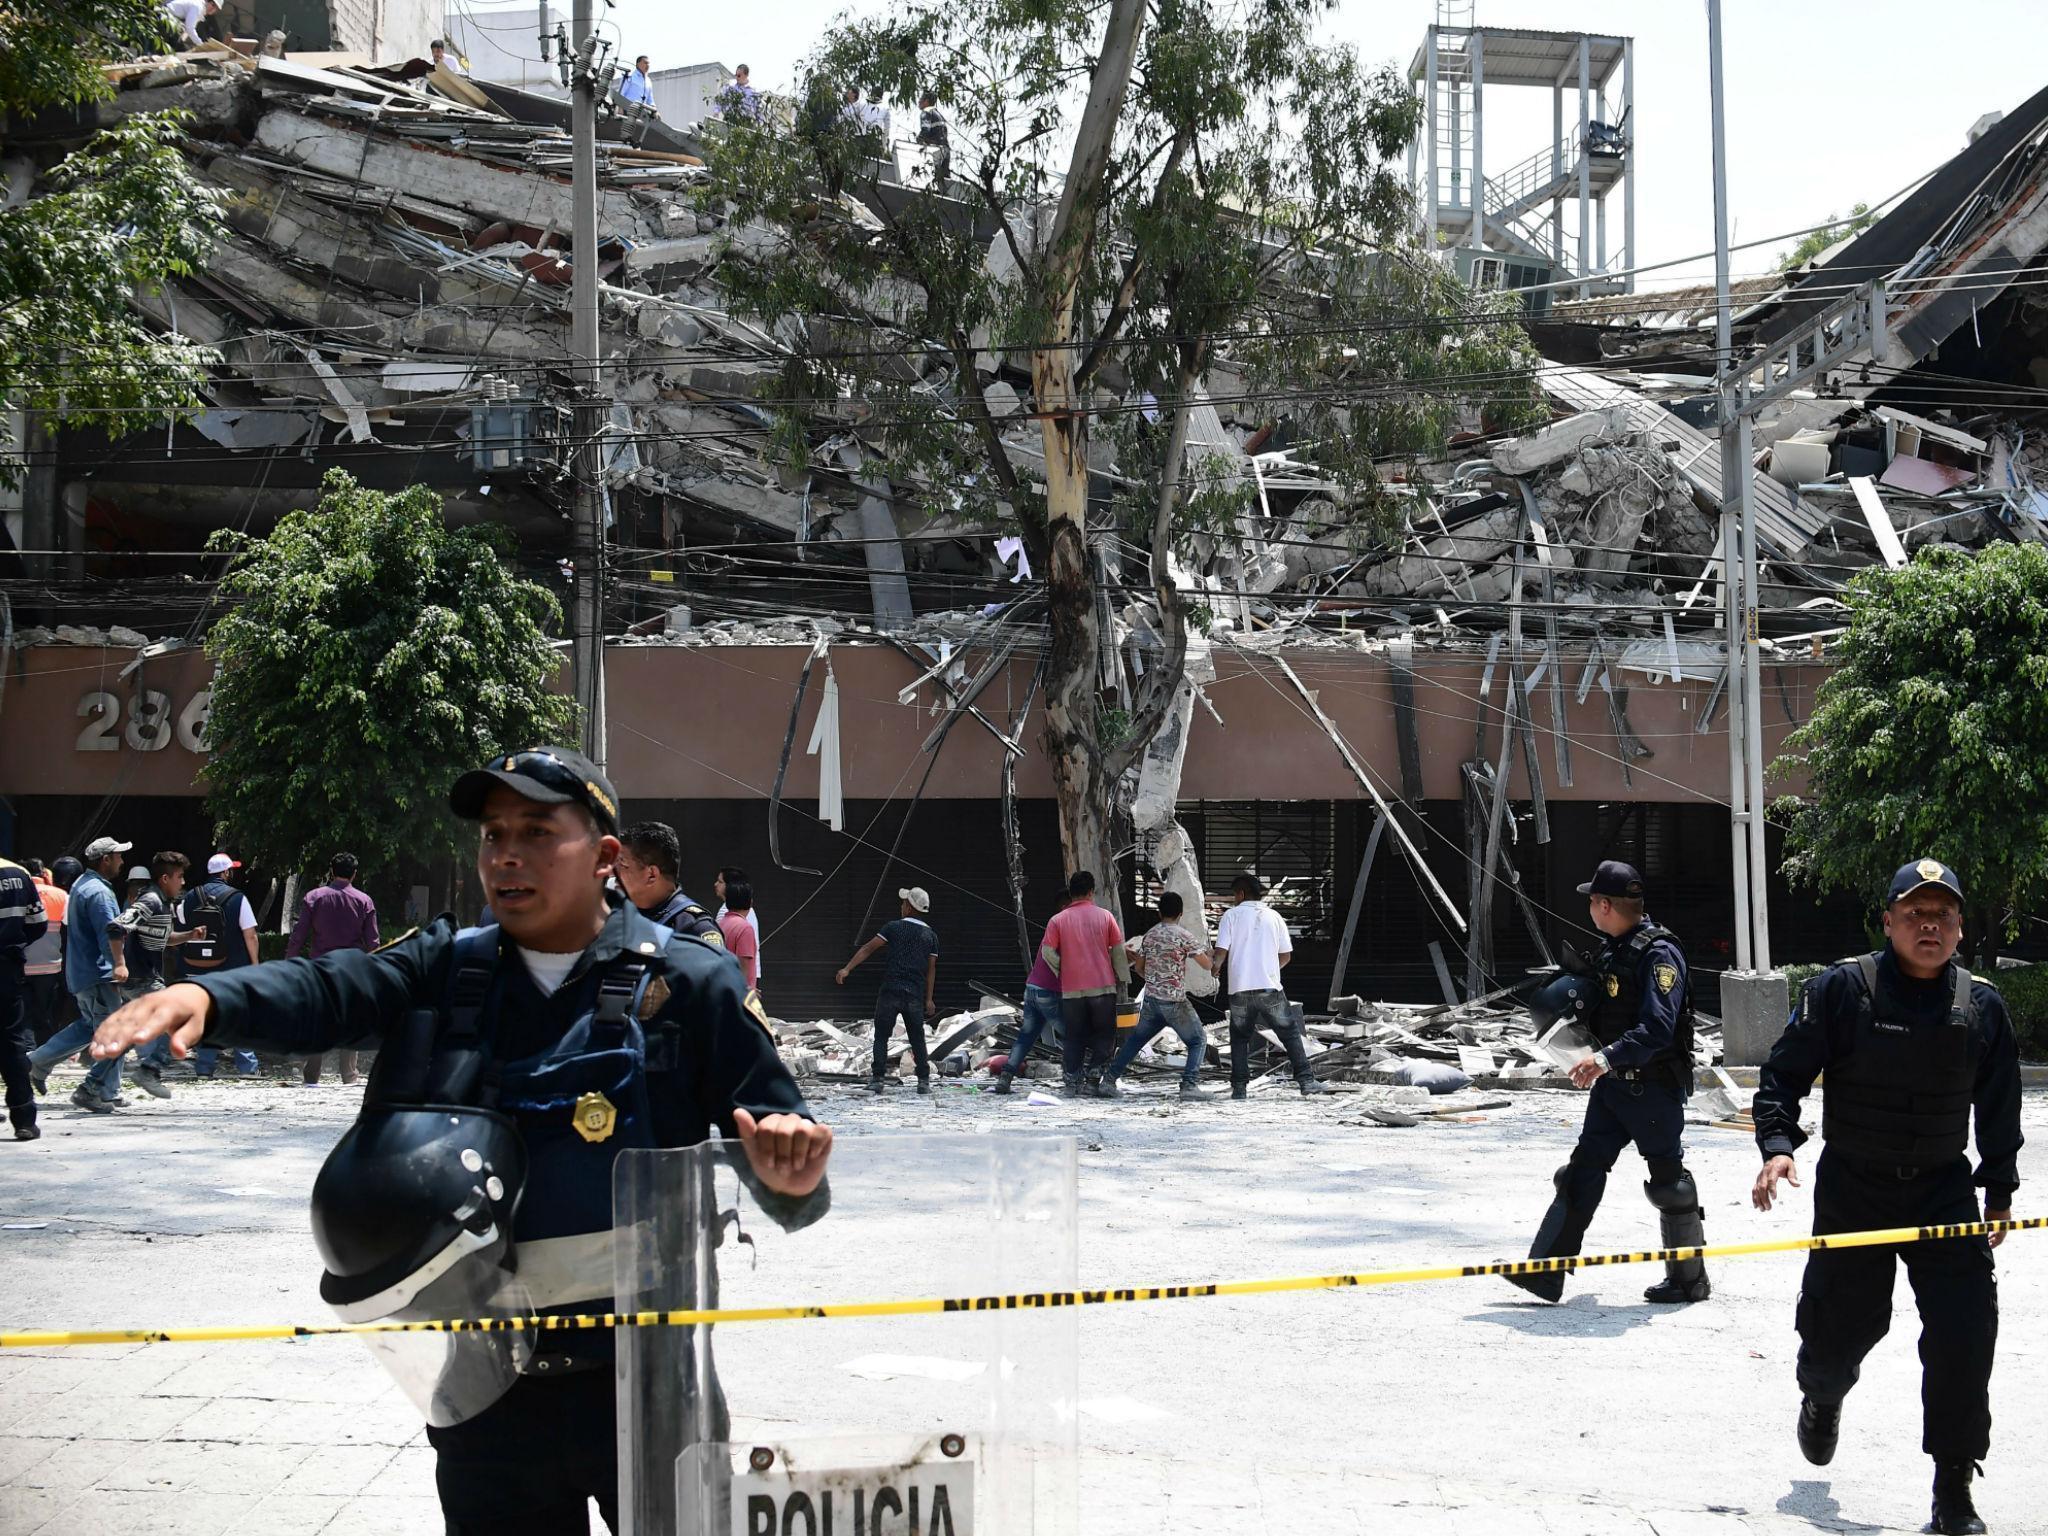 An injured woman is pictured in Mexico City after a 7.1 magnitude earthquake